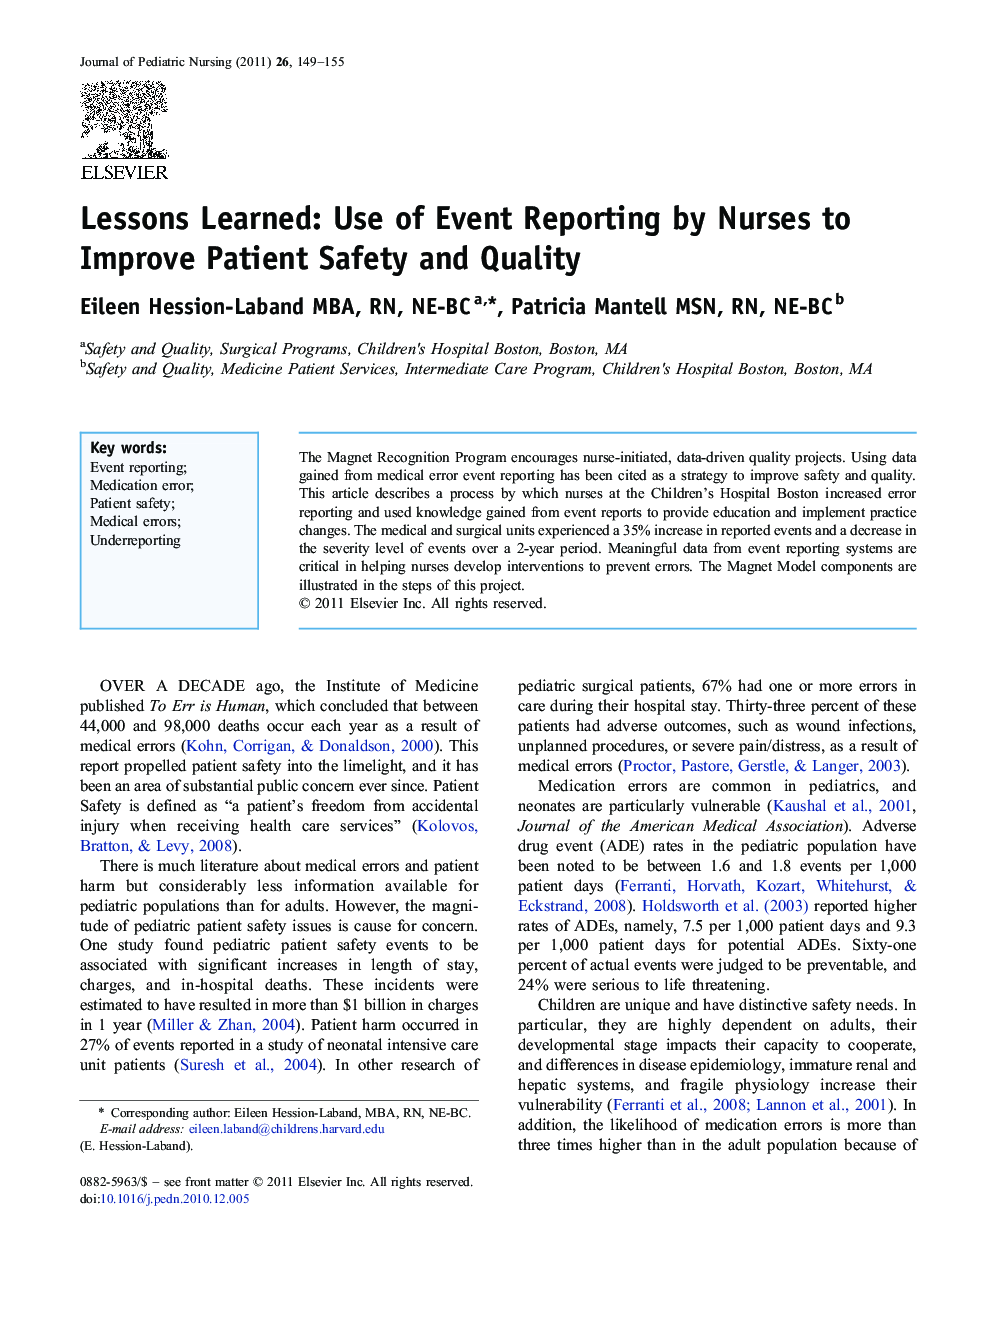 Lessons Learned: Use of Event Reporting by Nurses to Improve Patient Safety and Quality